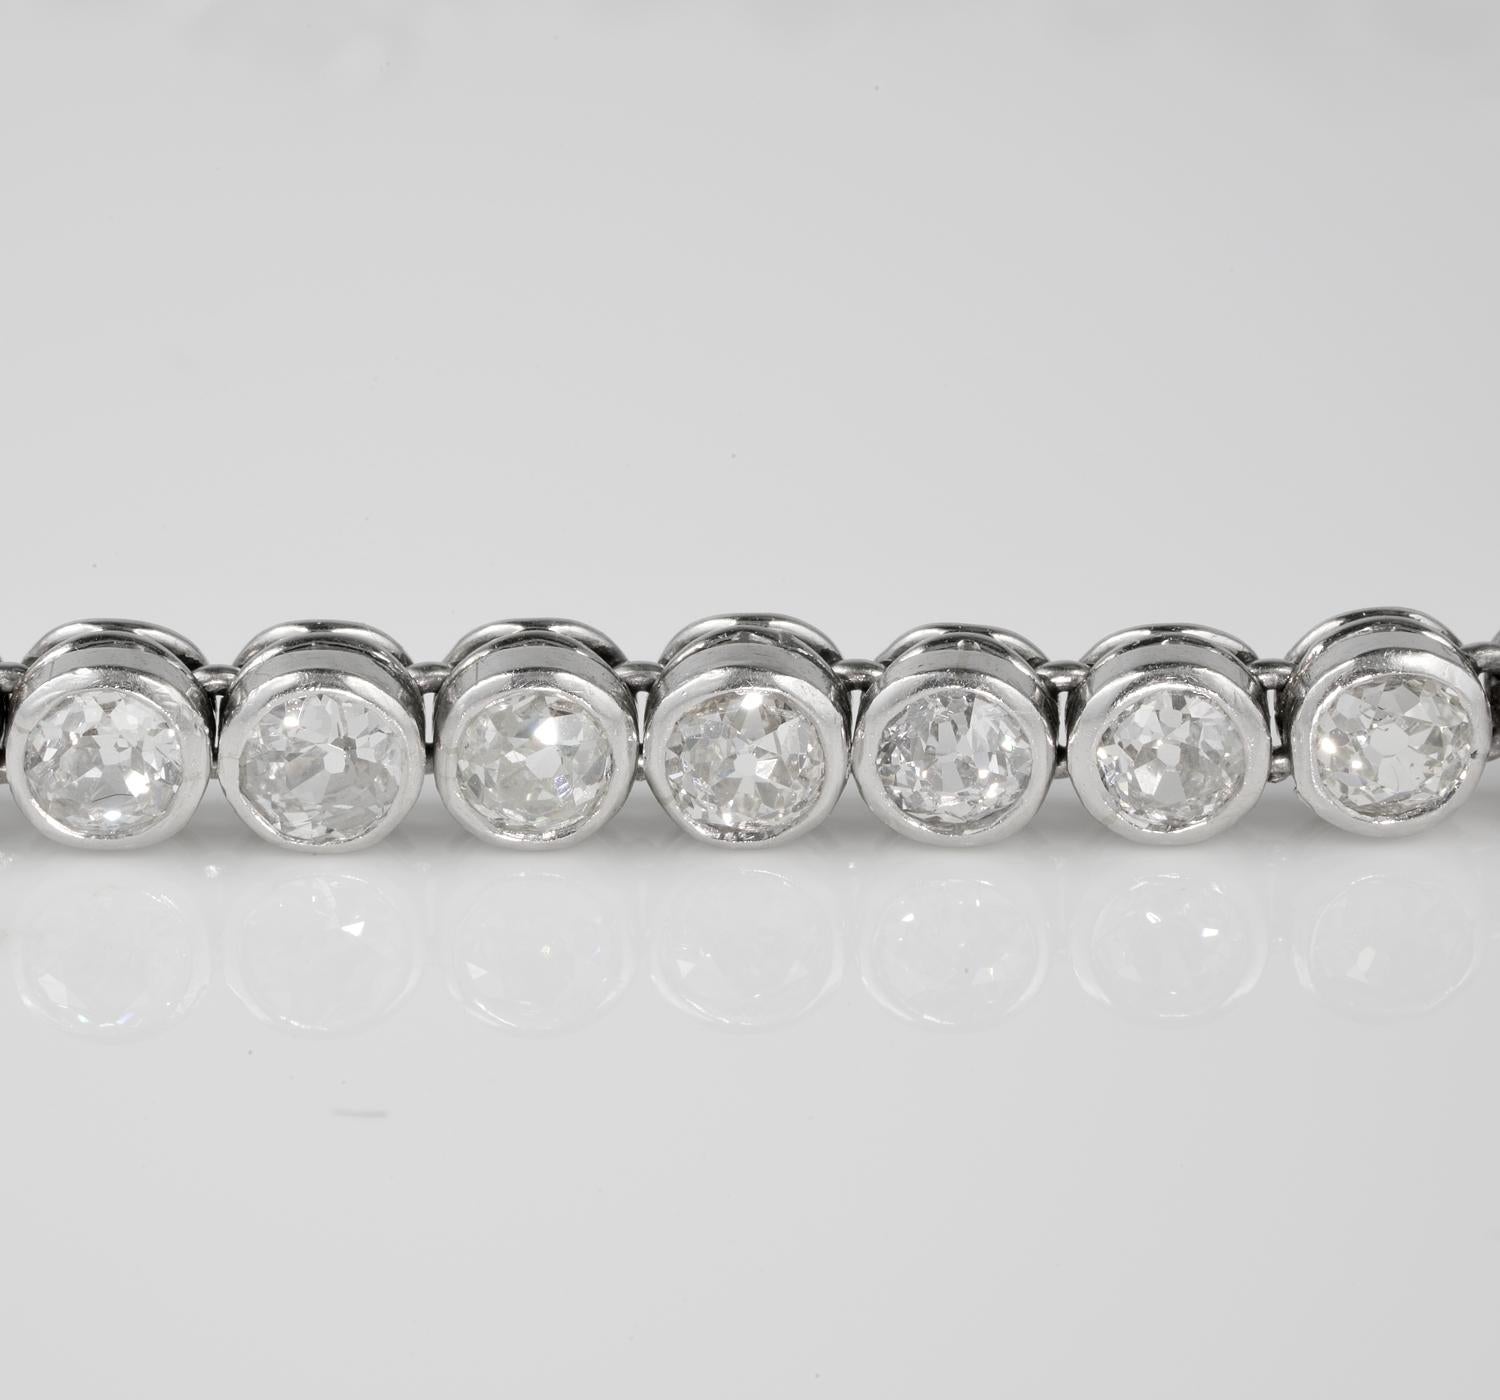 Rare Beauty!

Sought after and desirable antique At Deco period all Platinum made, Tennis bracelet
French origin – an authentic piece of the glorious 20's
Soft and smooth line, will wrap around your wrist in a sparkle continuous eternity line
Each